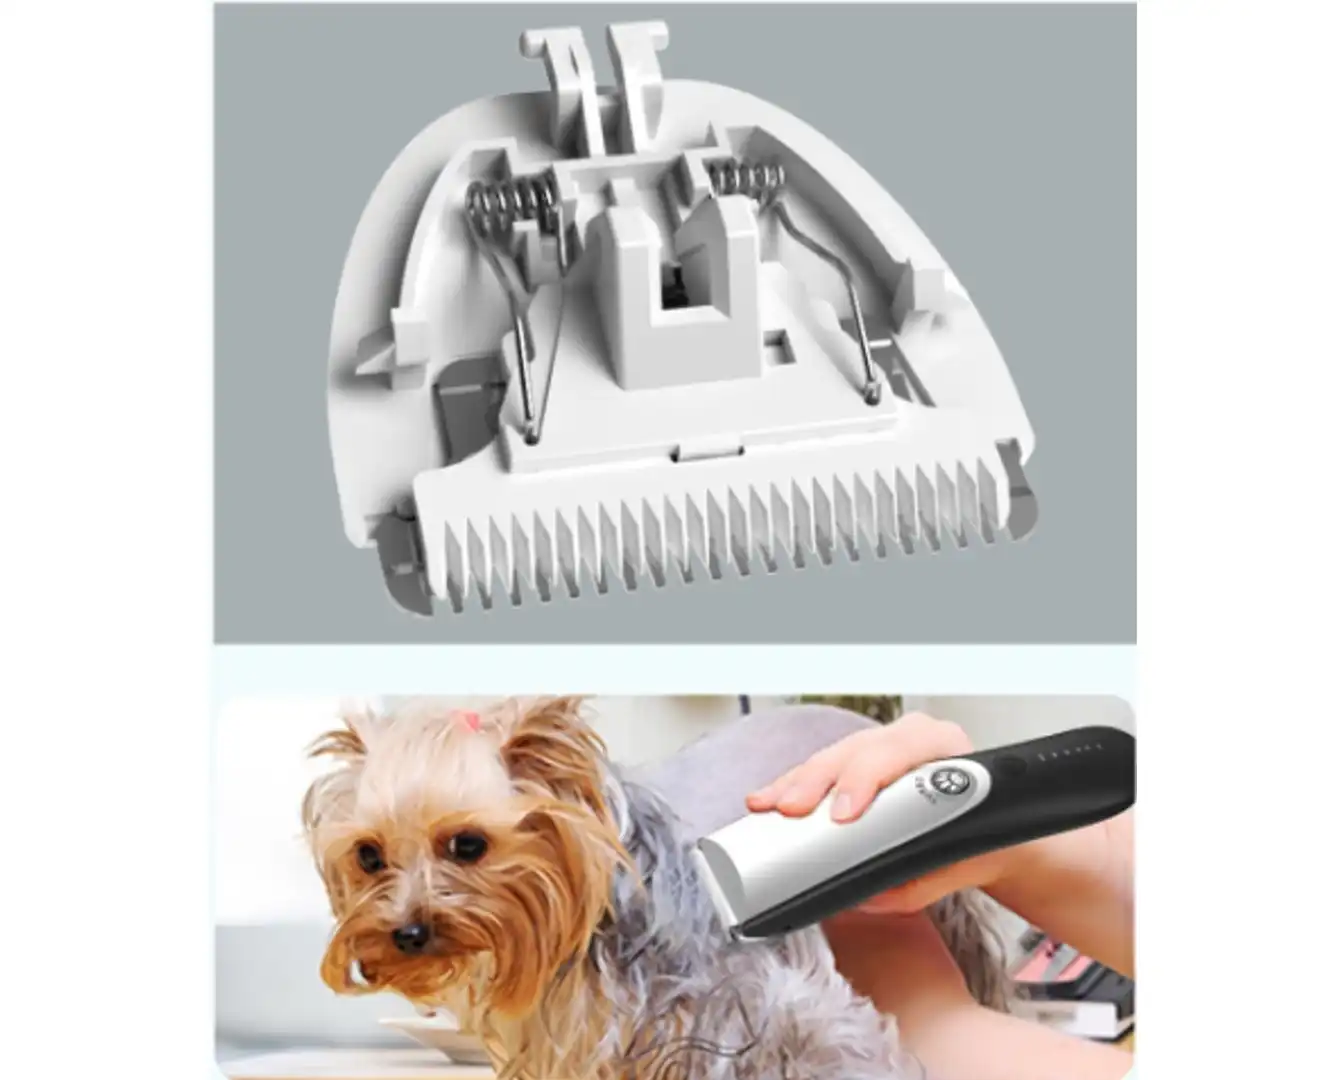 Professional Cordless Pet/Dog Trimmer and Clipper Grooming Kit For Home